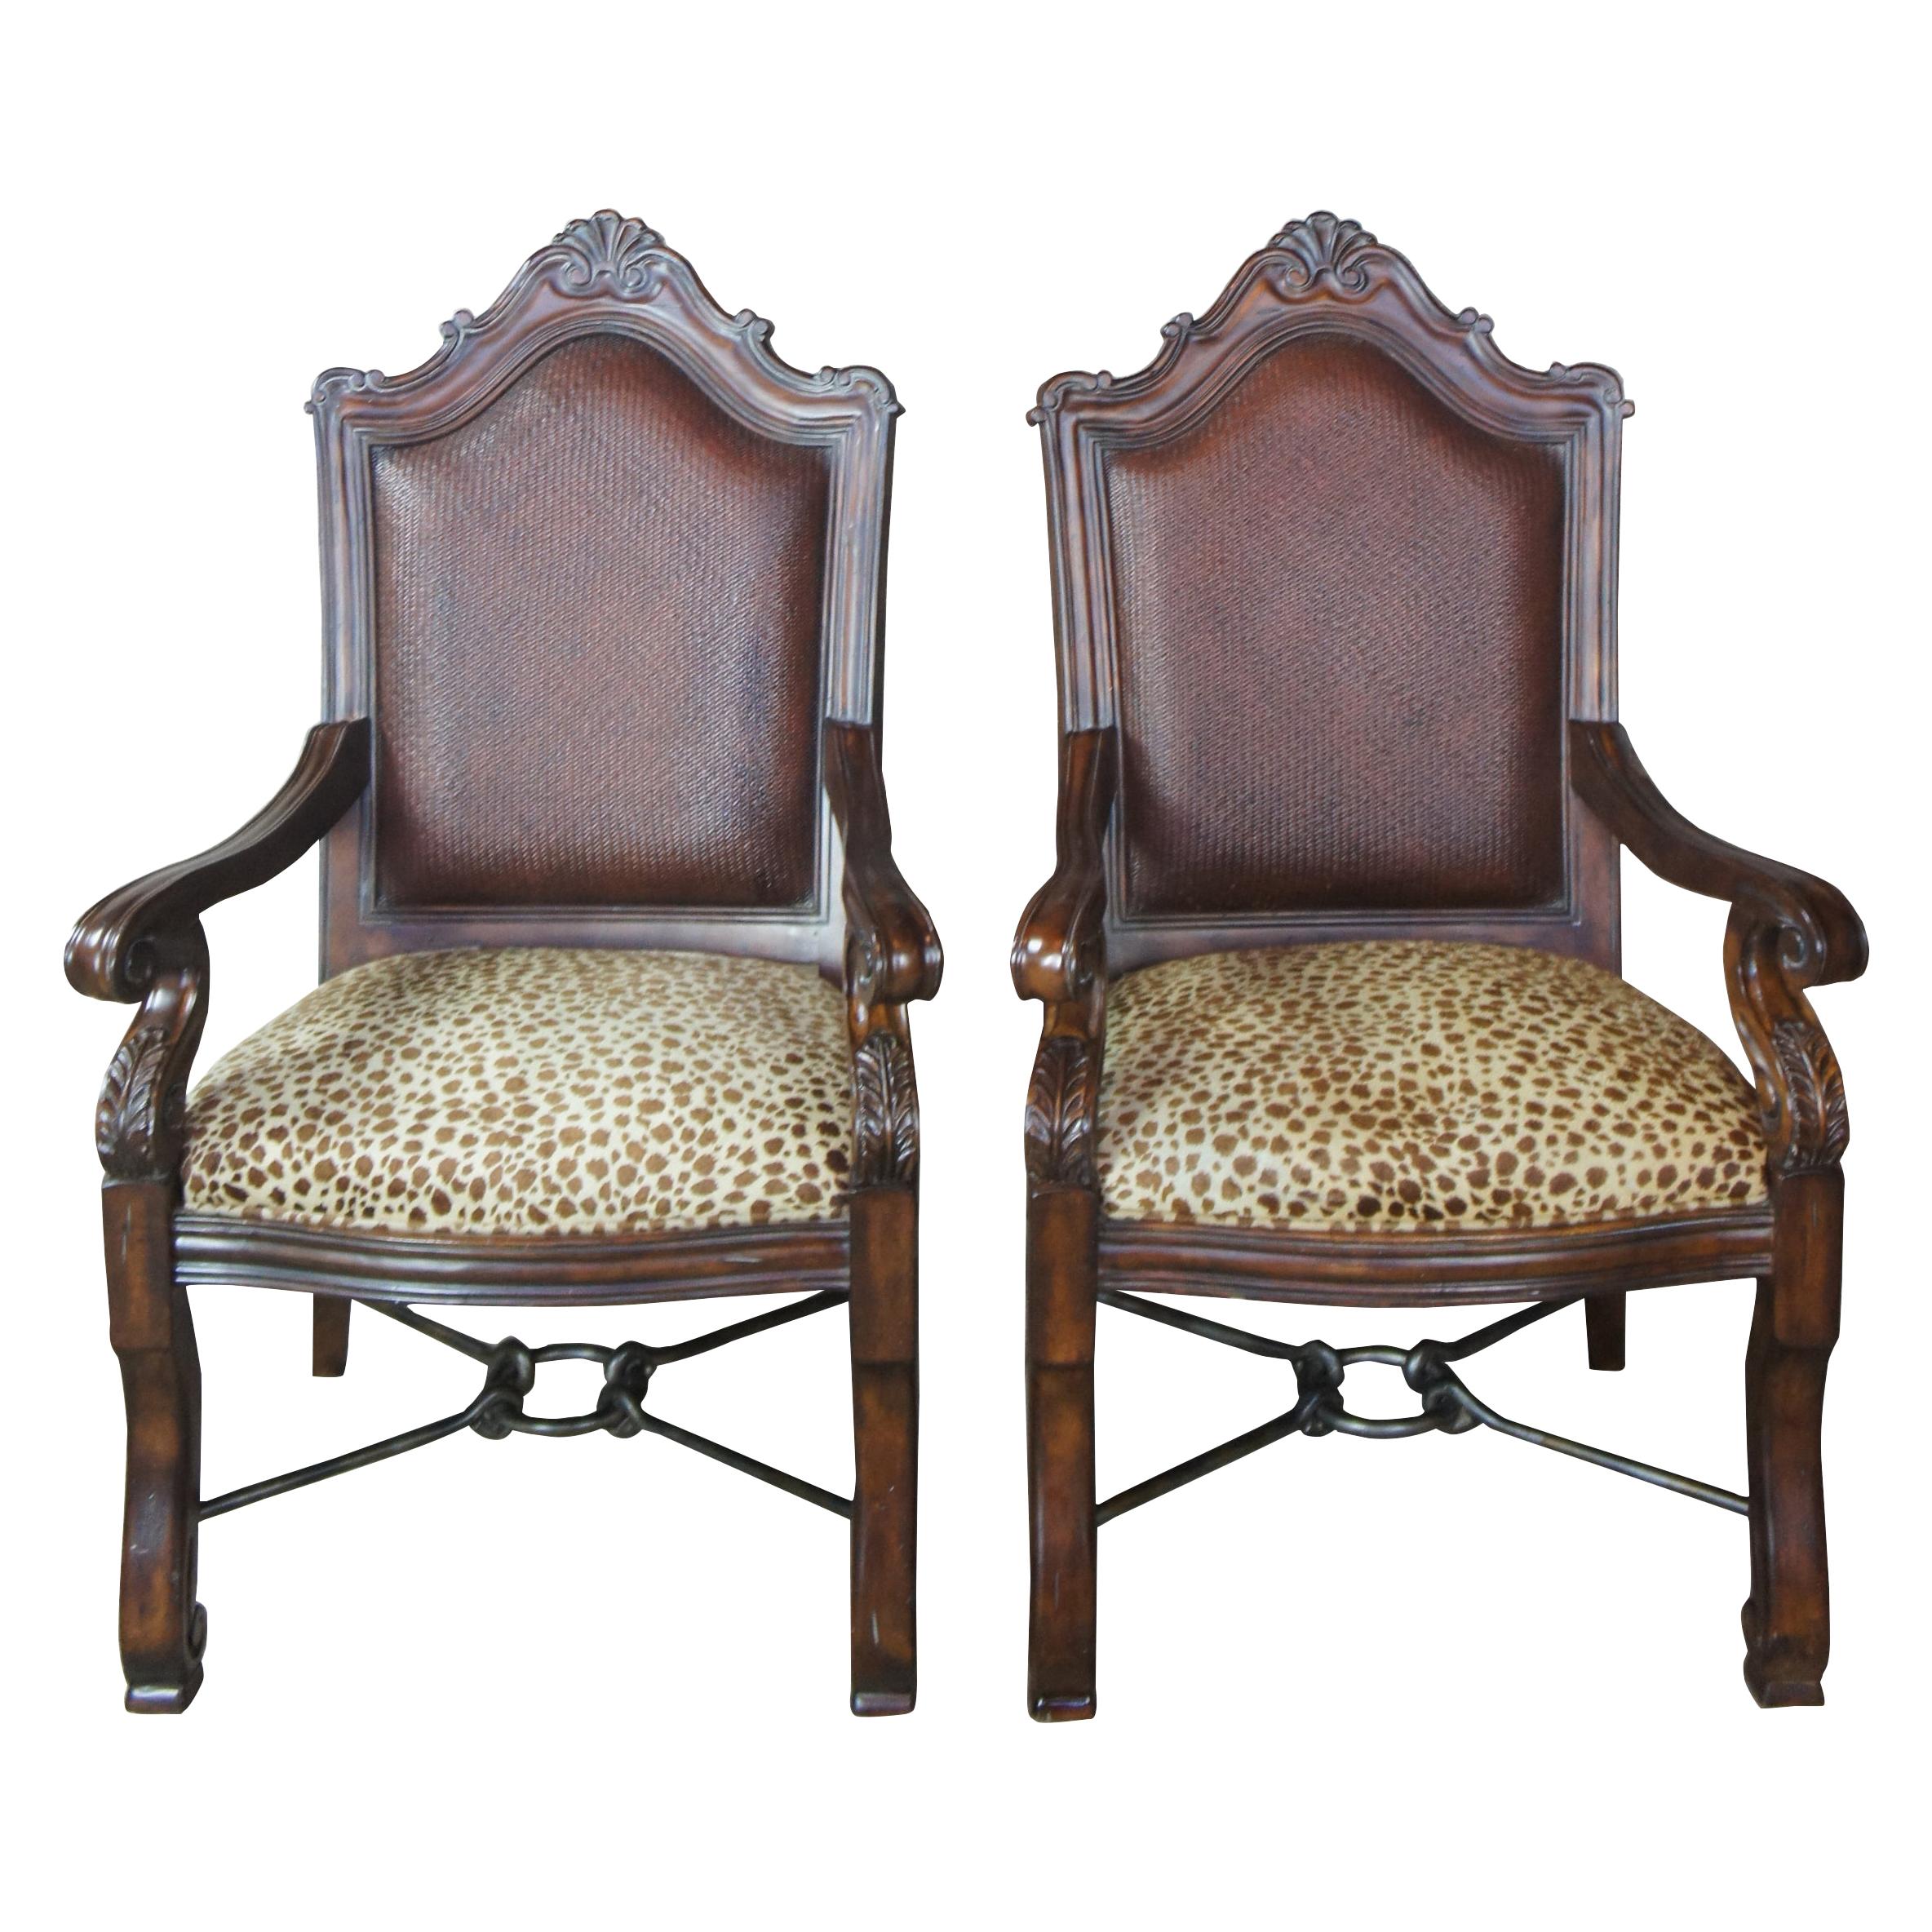 Old World Chairs - 2 For Sale on 1stDibs